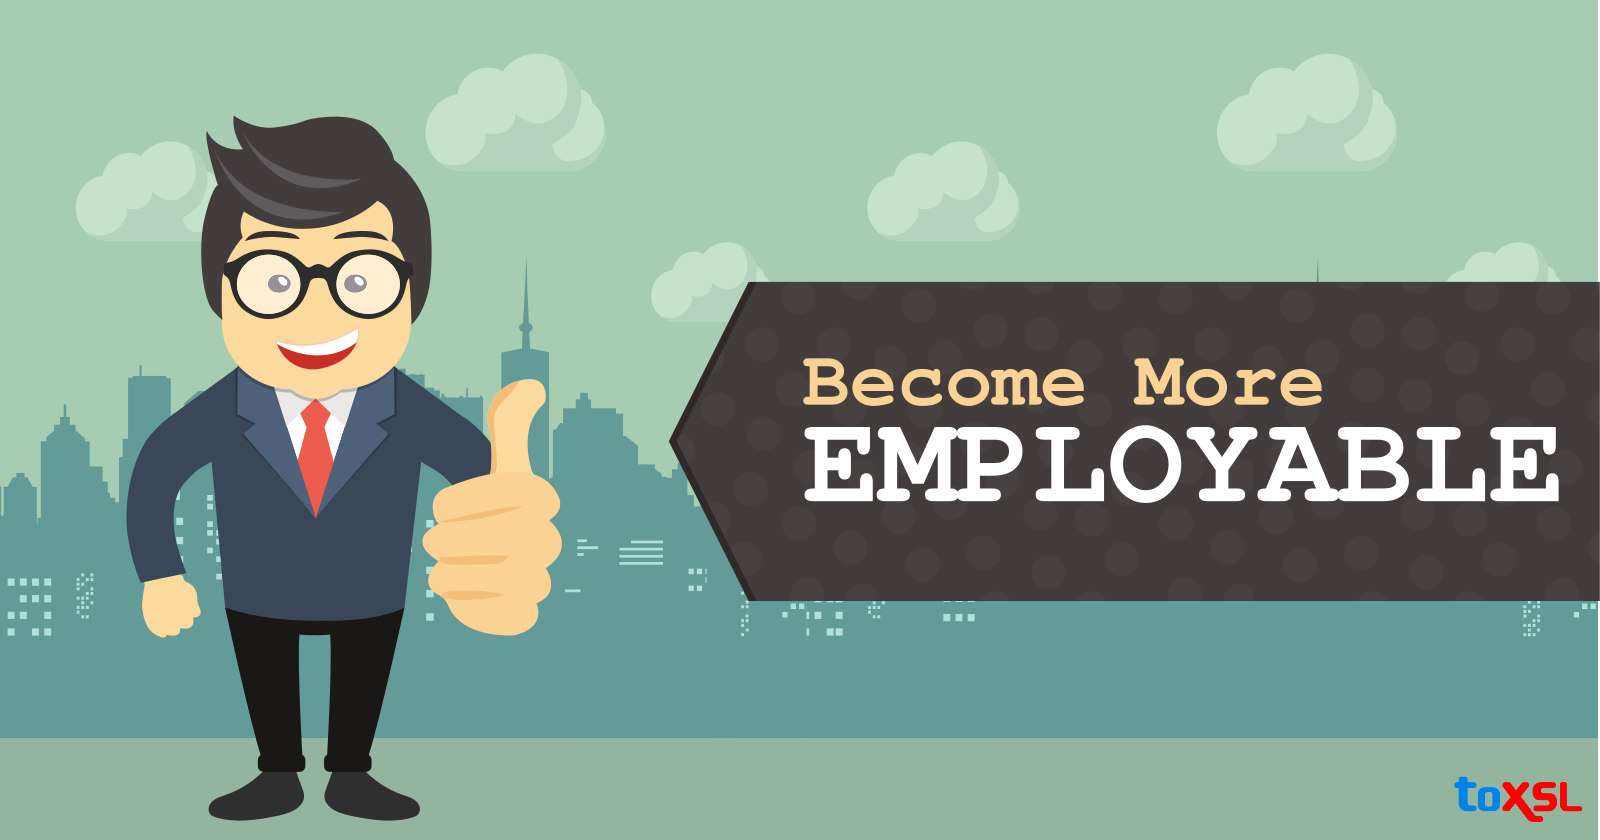 How to become more employable?